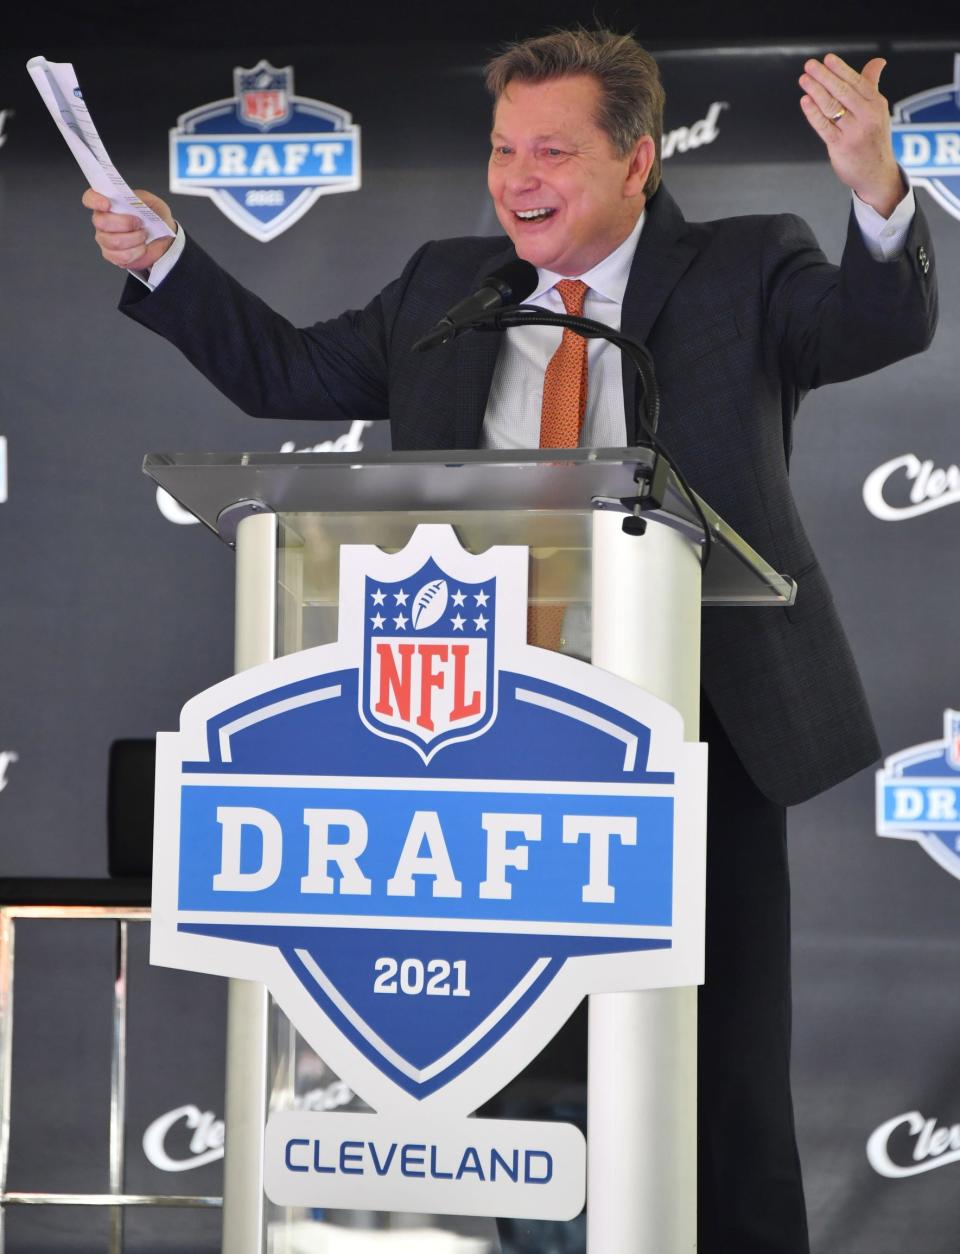 Browns radio announcer Jim Donovan speaks during a press conference to announce Cleveland as the host of the 2021 NFL draft.